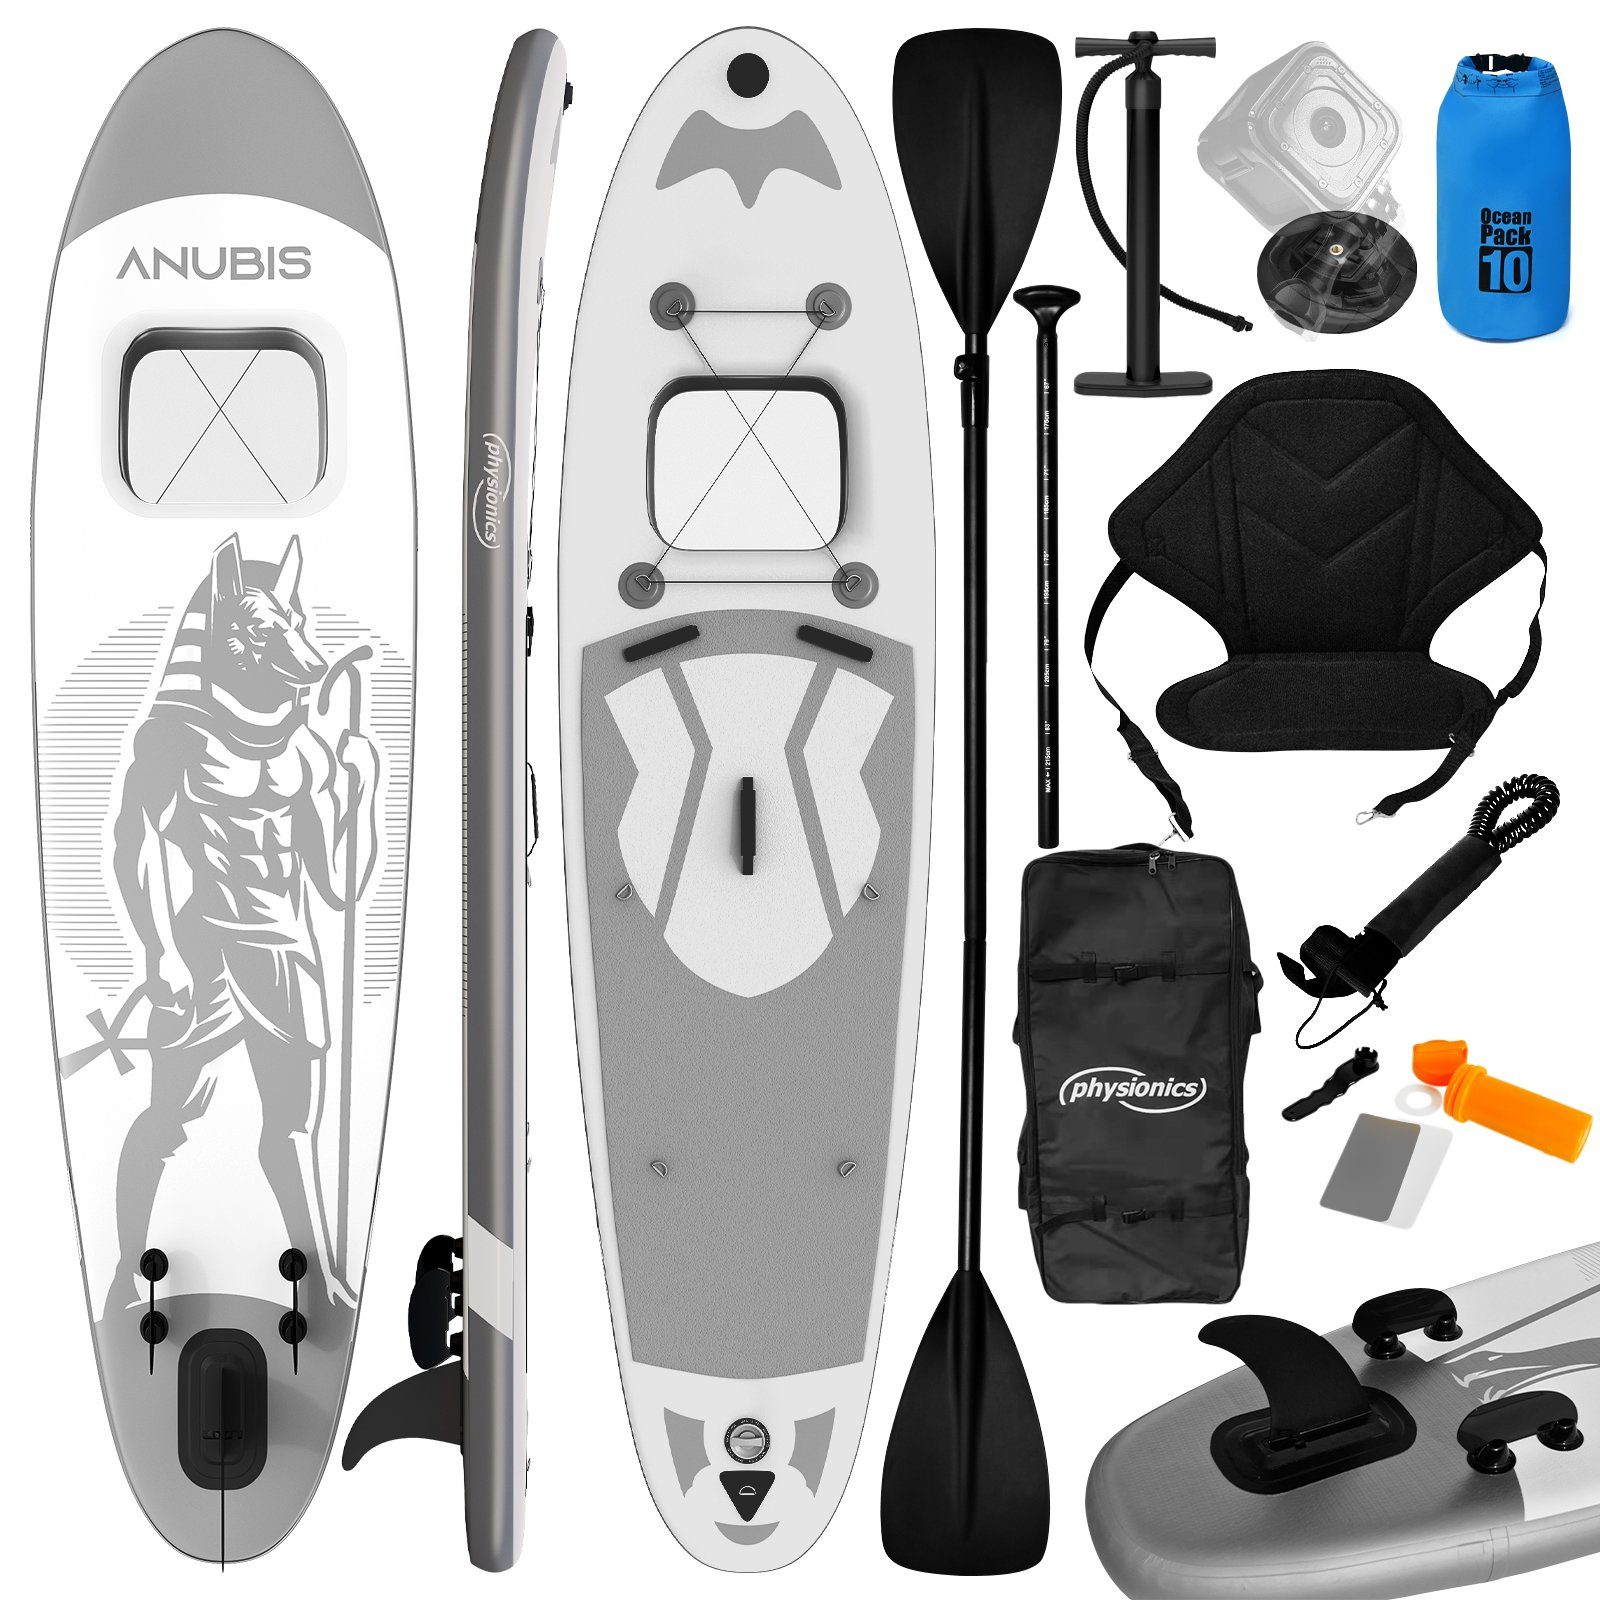 SUP-Board Board Stand Board Paddle SUP Aufblasbares 320cm Up Anubis(Silber) Physionics